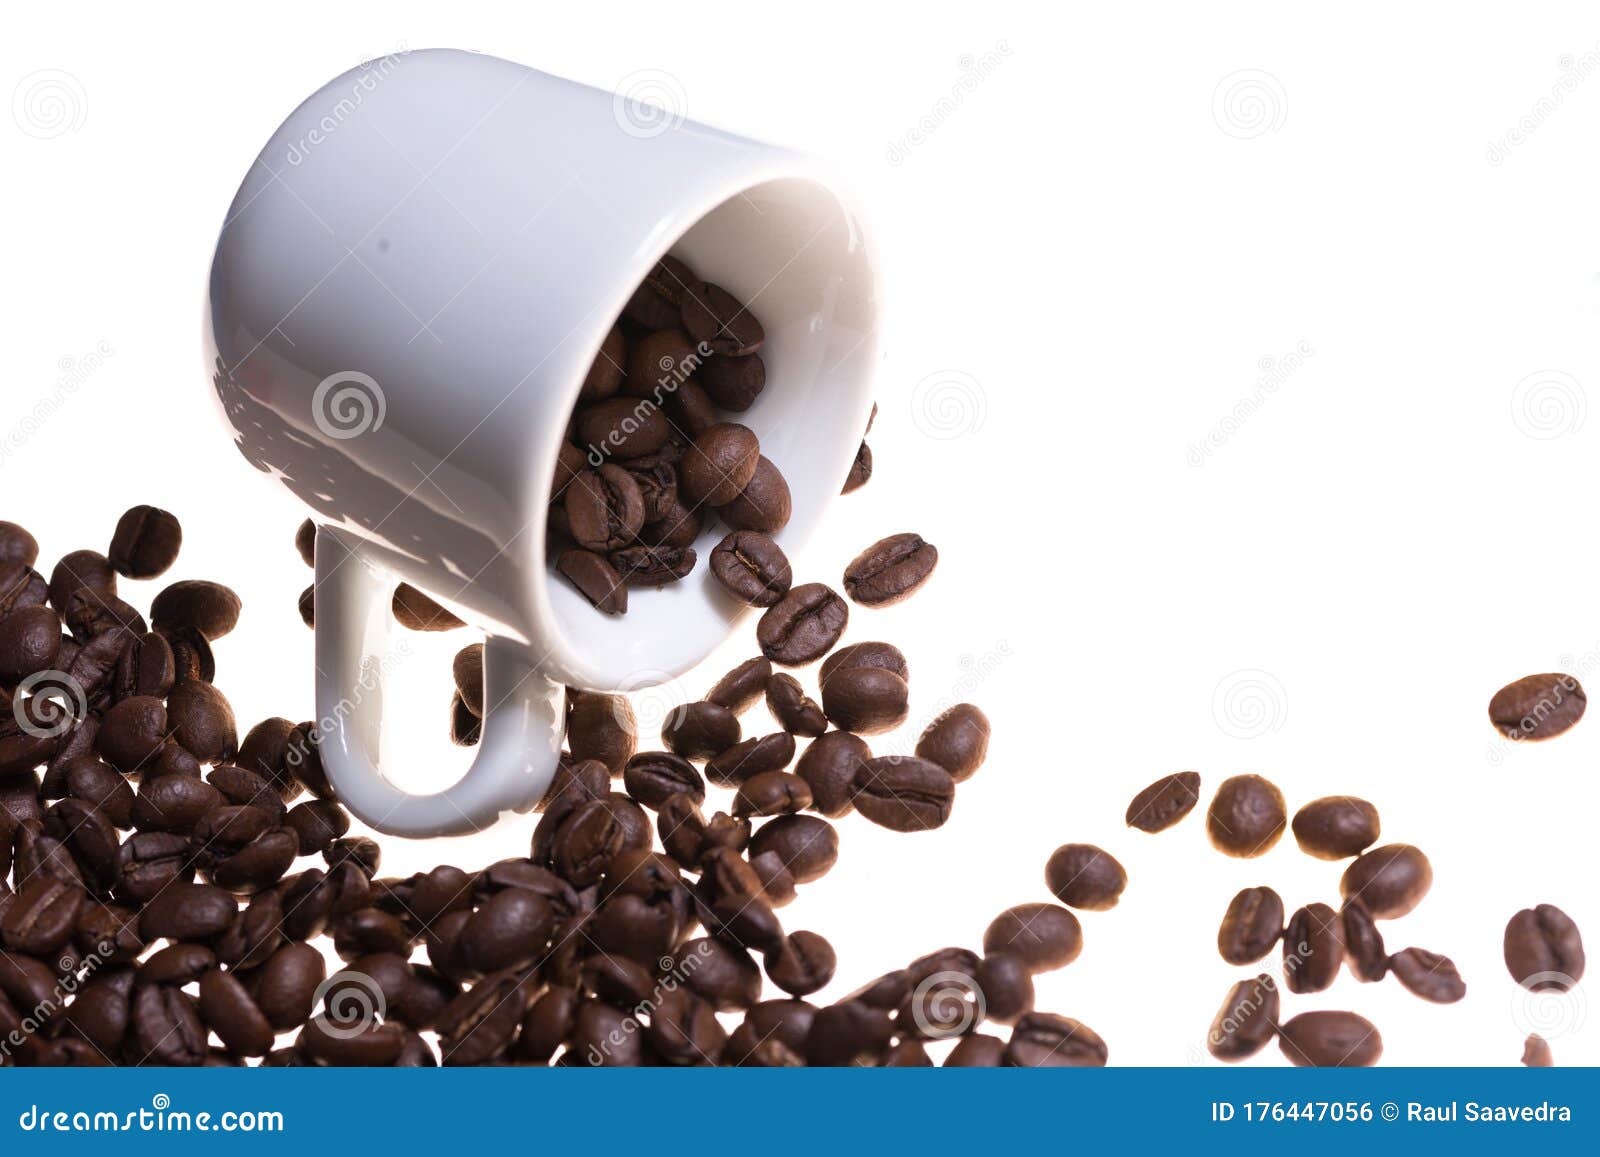 cup of coffee  on white